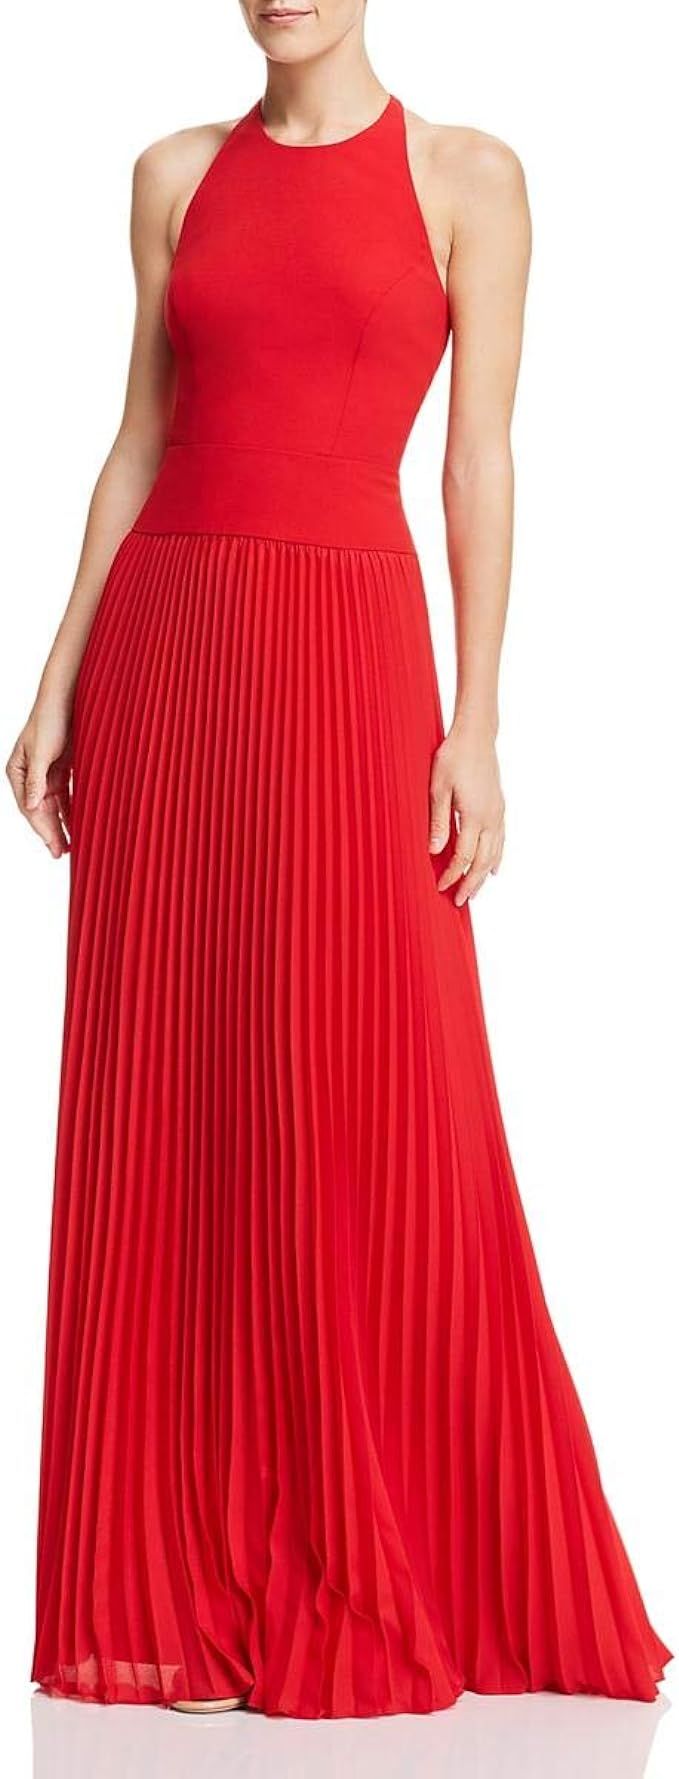 Aidan by Aidan Mattox Women's Crepe Halter Gown with Pleated Skirt | Amazon (US)